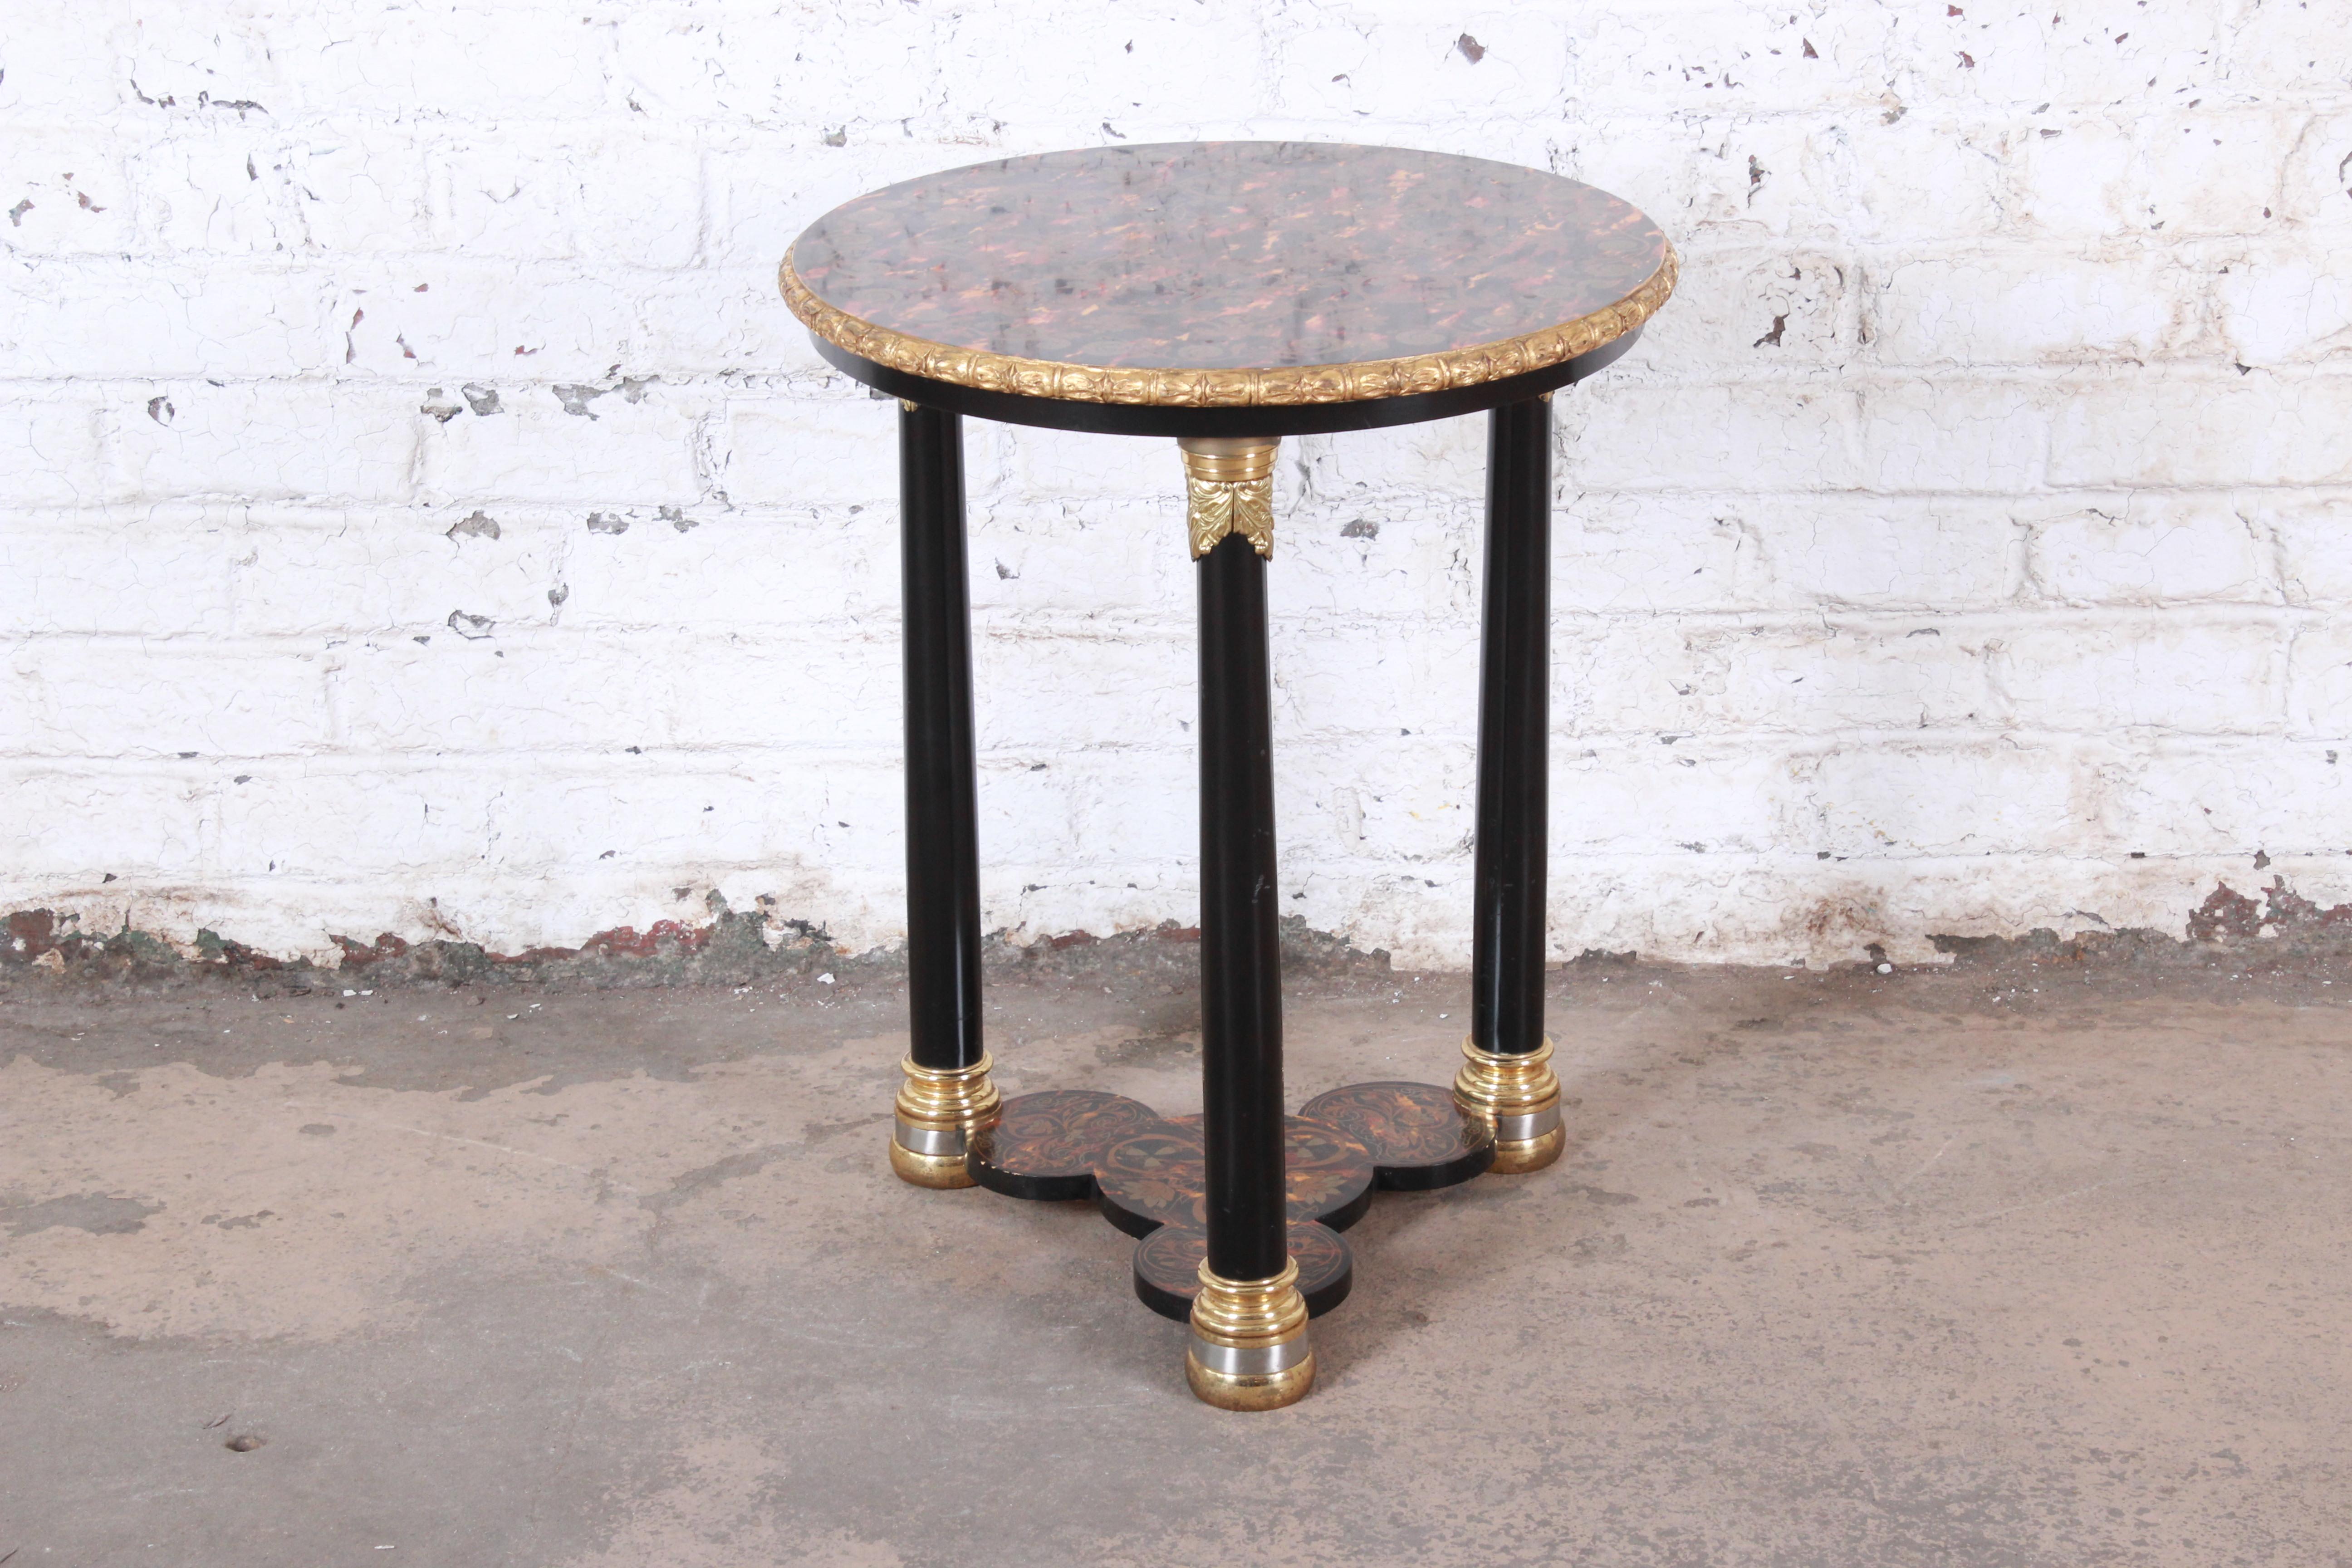 Ornate neoclassical style occasional side table

Made by John Widdicomb

USA, 2000s

Ebonized wood and brass and giltwood and paint

Measures: 23.25